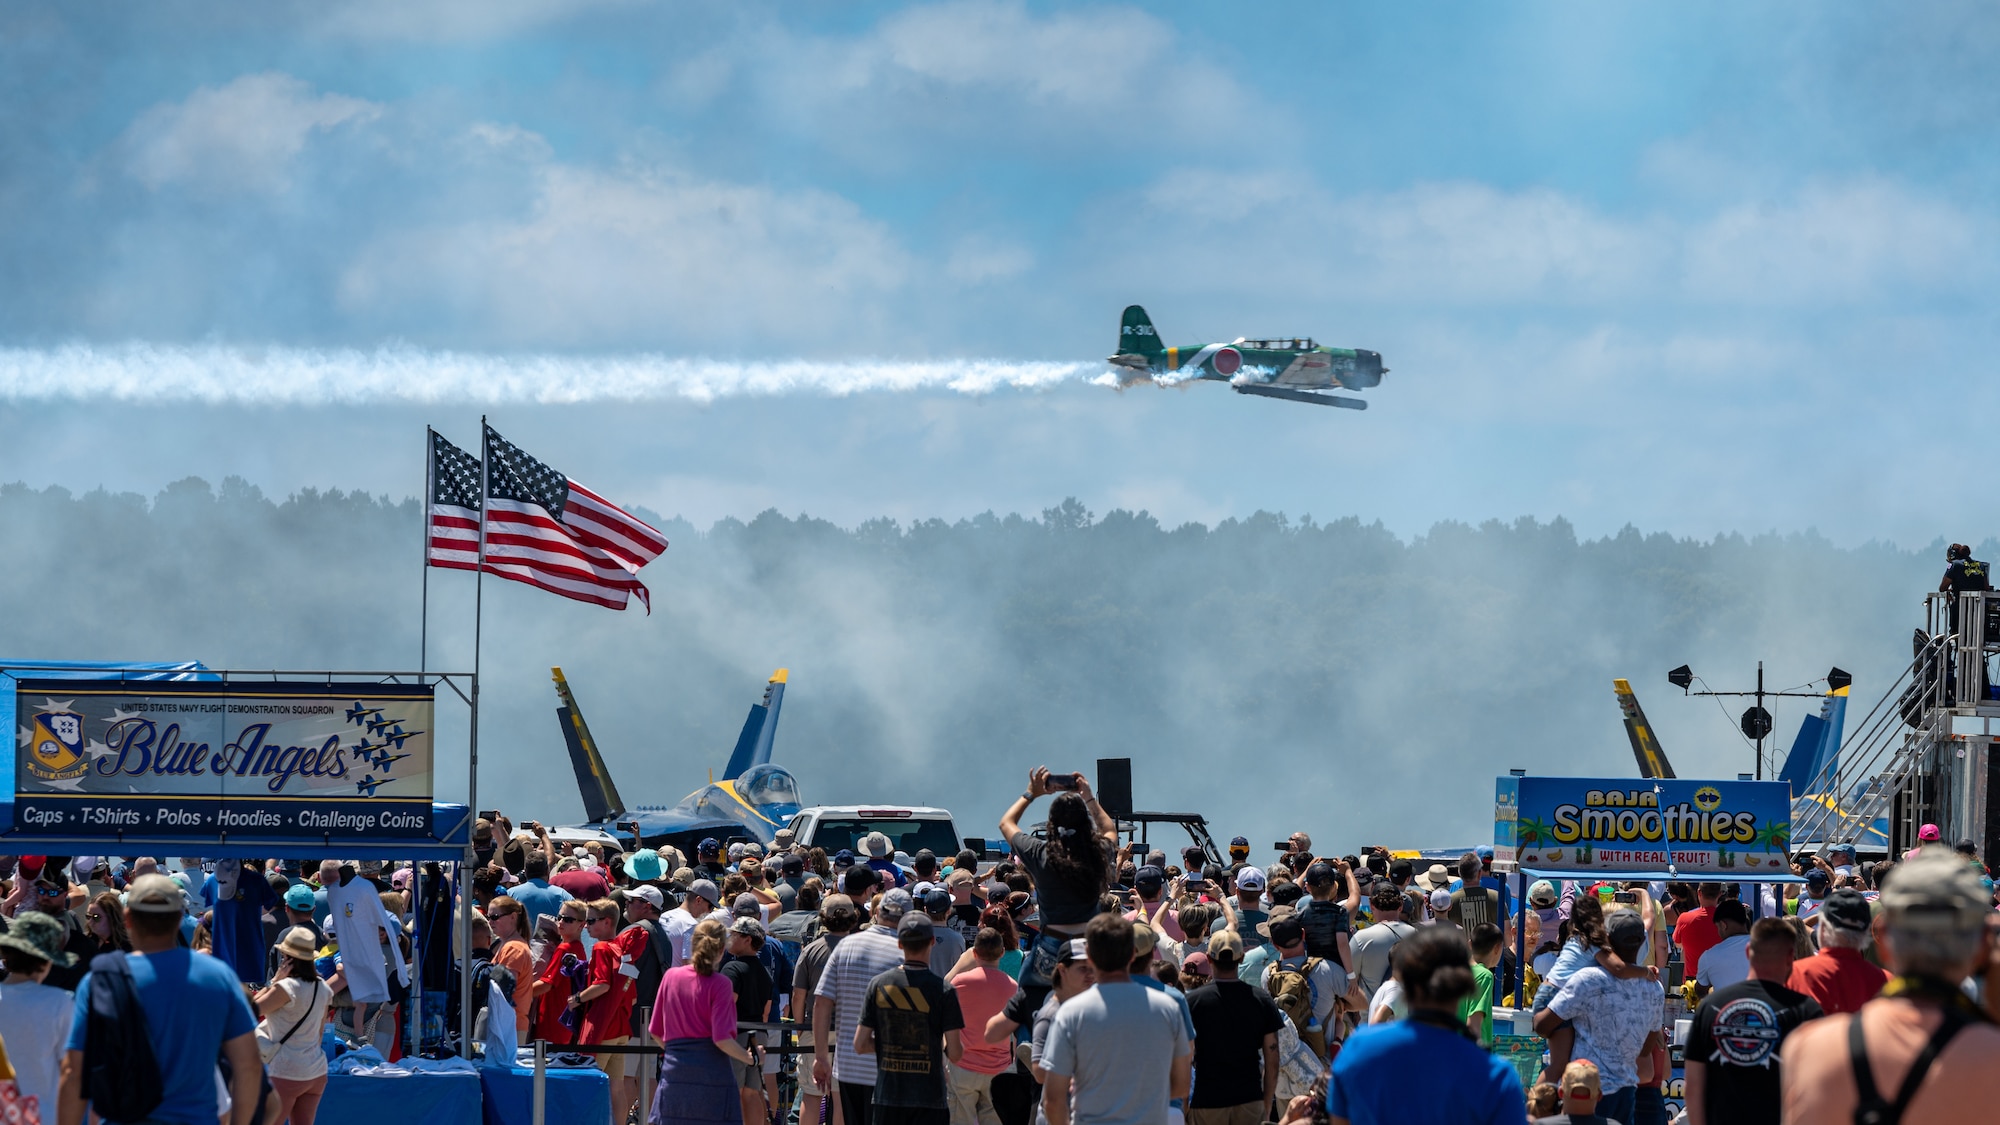 A Tora Tora Tora Warbird performer conducts an air-to-ground combat demonstration during the 2023 Wings over Wayne Air Show and Science and Technology Expo at Seymour Johnson Air Force Base, North Carolina, May 20, 2023. The Tora Tora Tora Warbirds began in 1972 after the 6 replica Japanese aircraft were used in the movie “Tora! Tora! Tora!” and were donated to the Commemorative Air Force. (U.S. Air Force photo by Airman 1st Class Leighton Lucero)